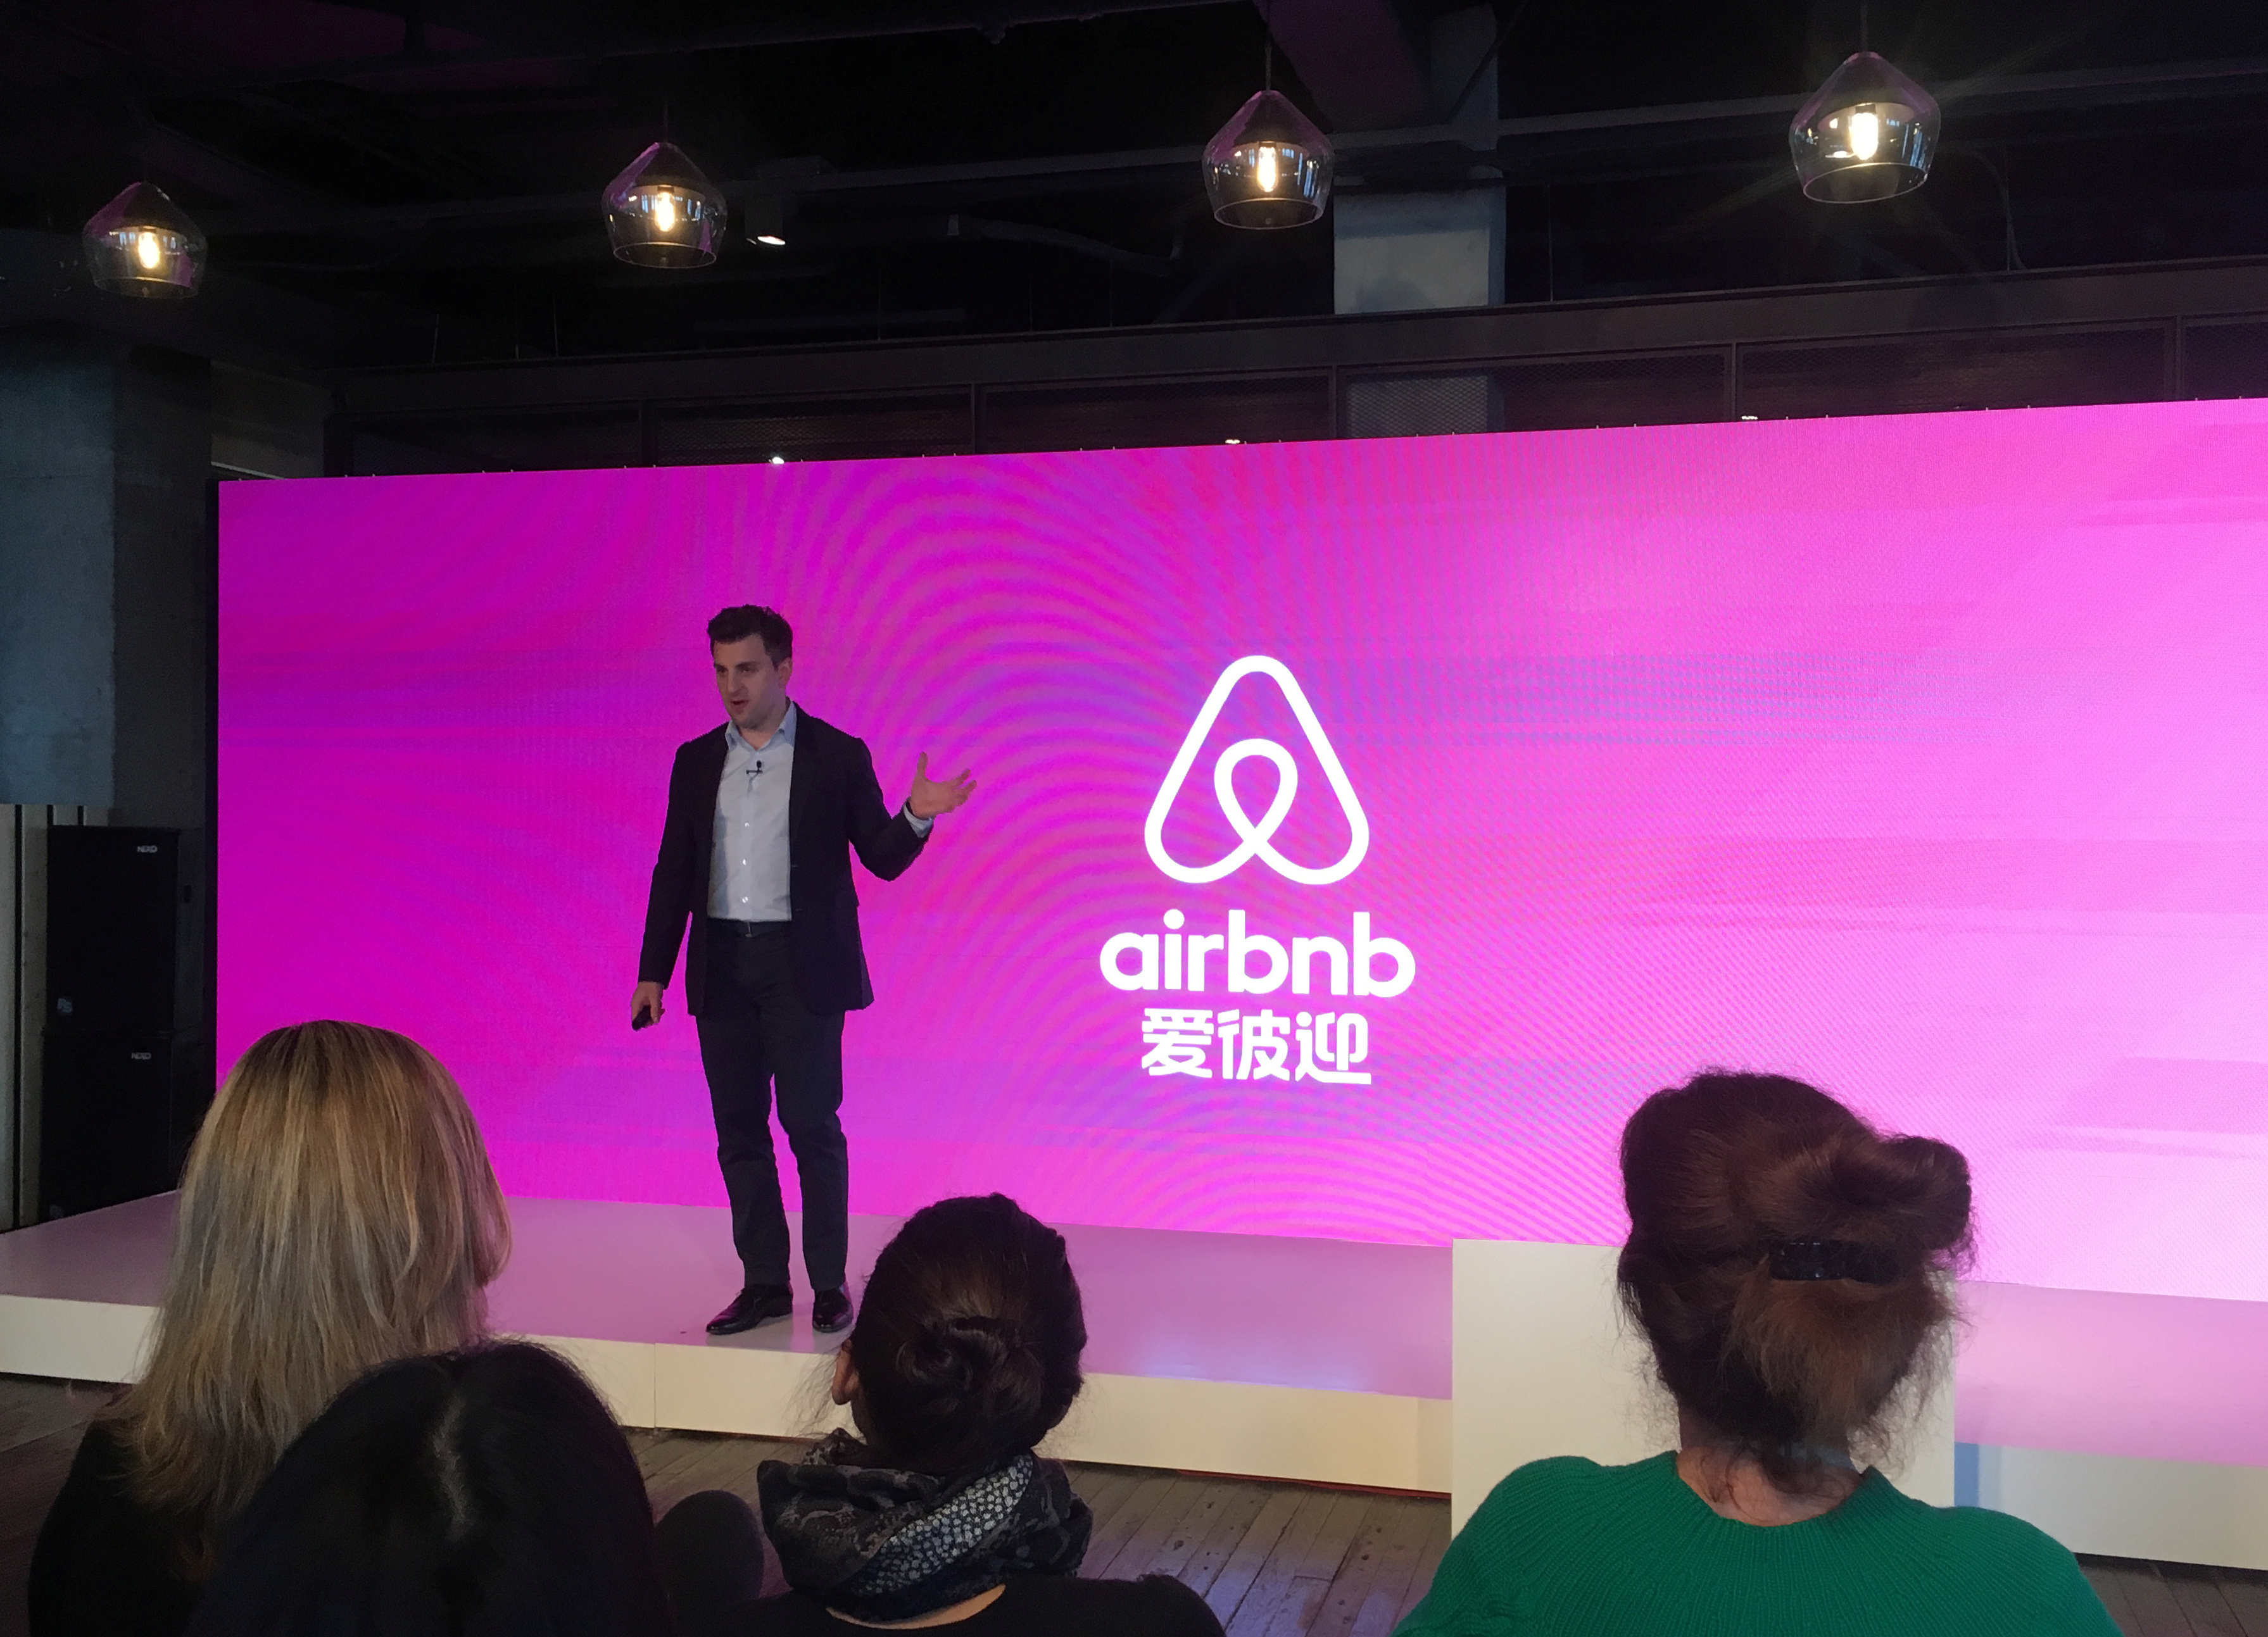 Airbnb Co-Founder and CEO Brian Chesky speaks at an event to launch the brand's Chinese name, in Shanghai